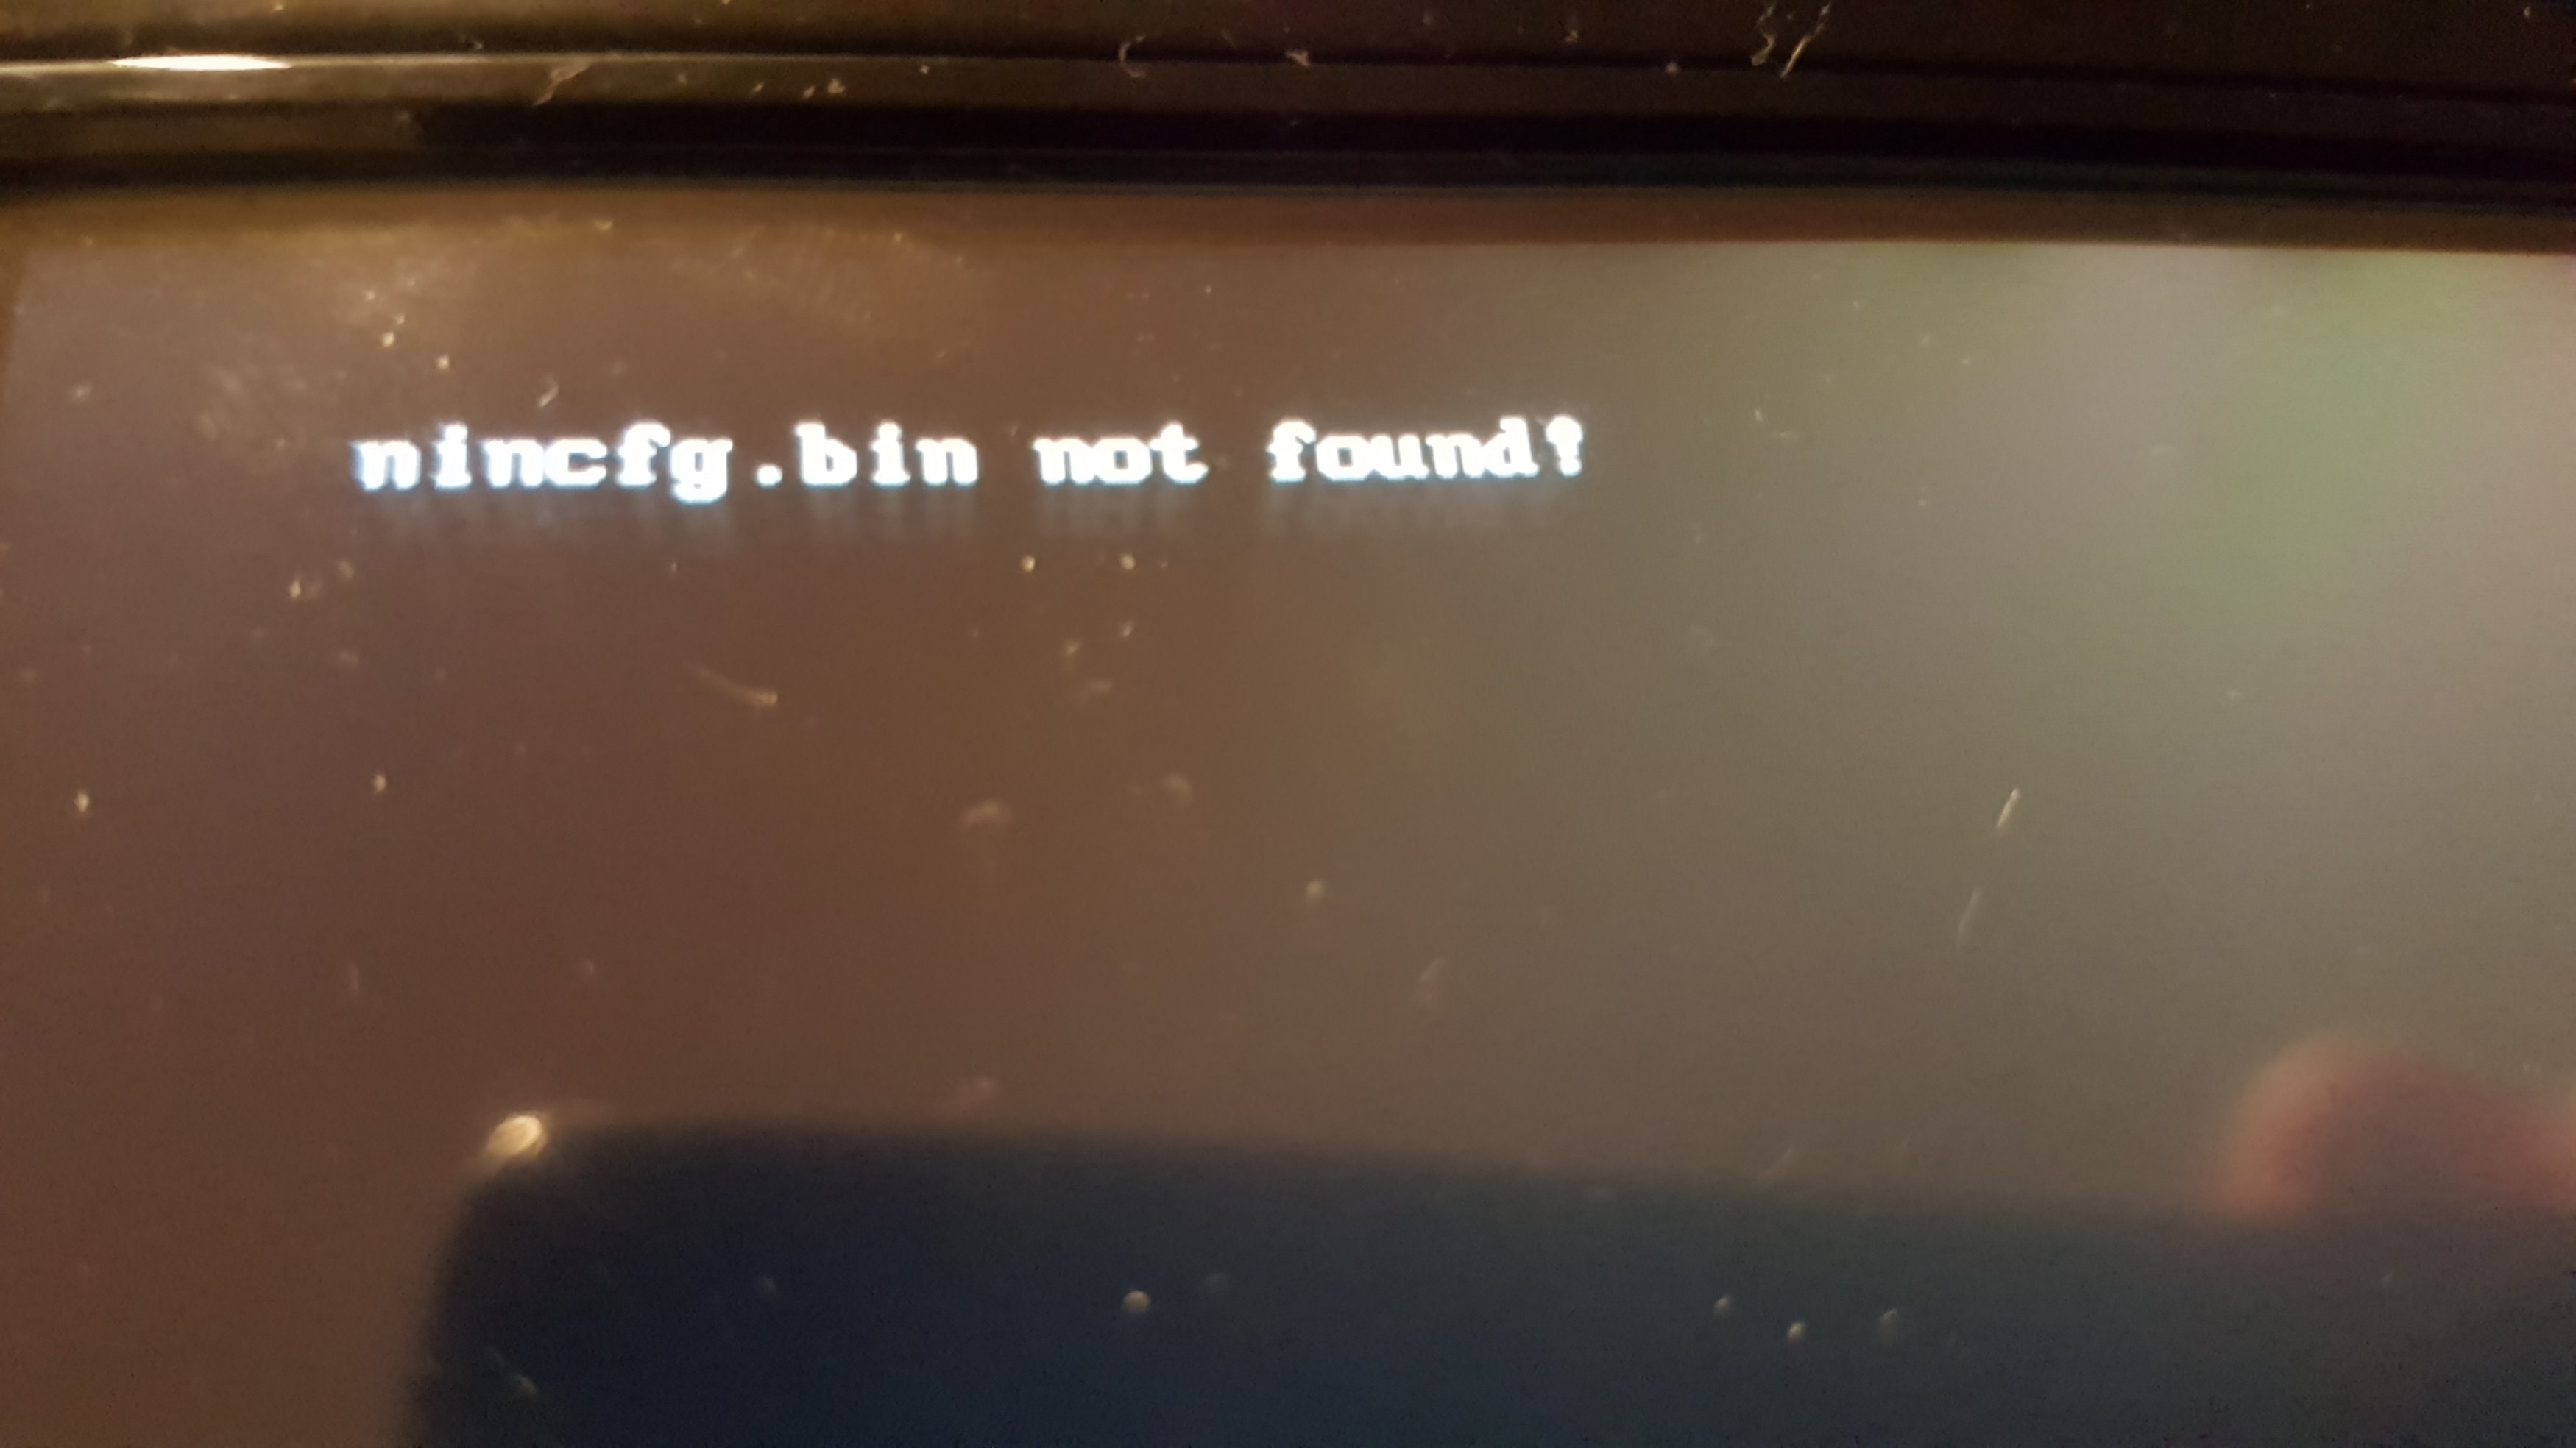 Boot.dol not found!   - The Independent Video Game